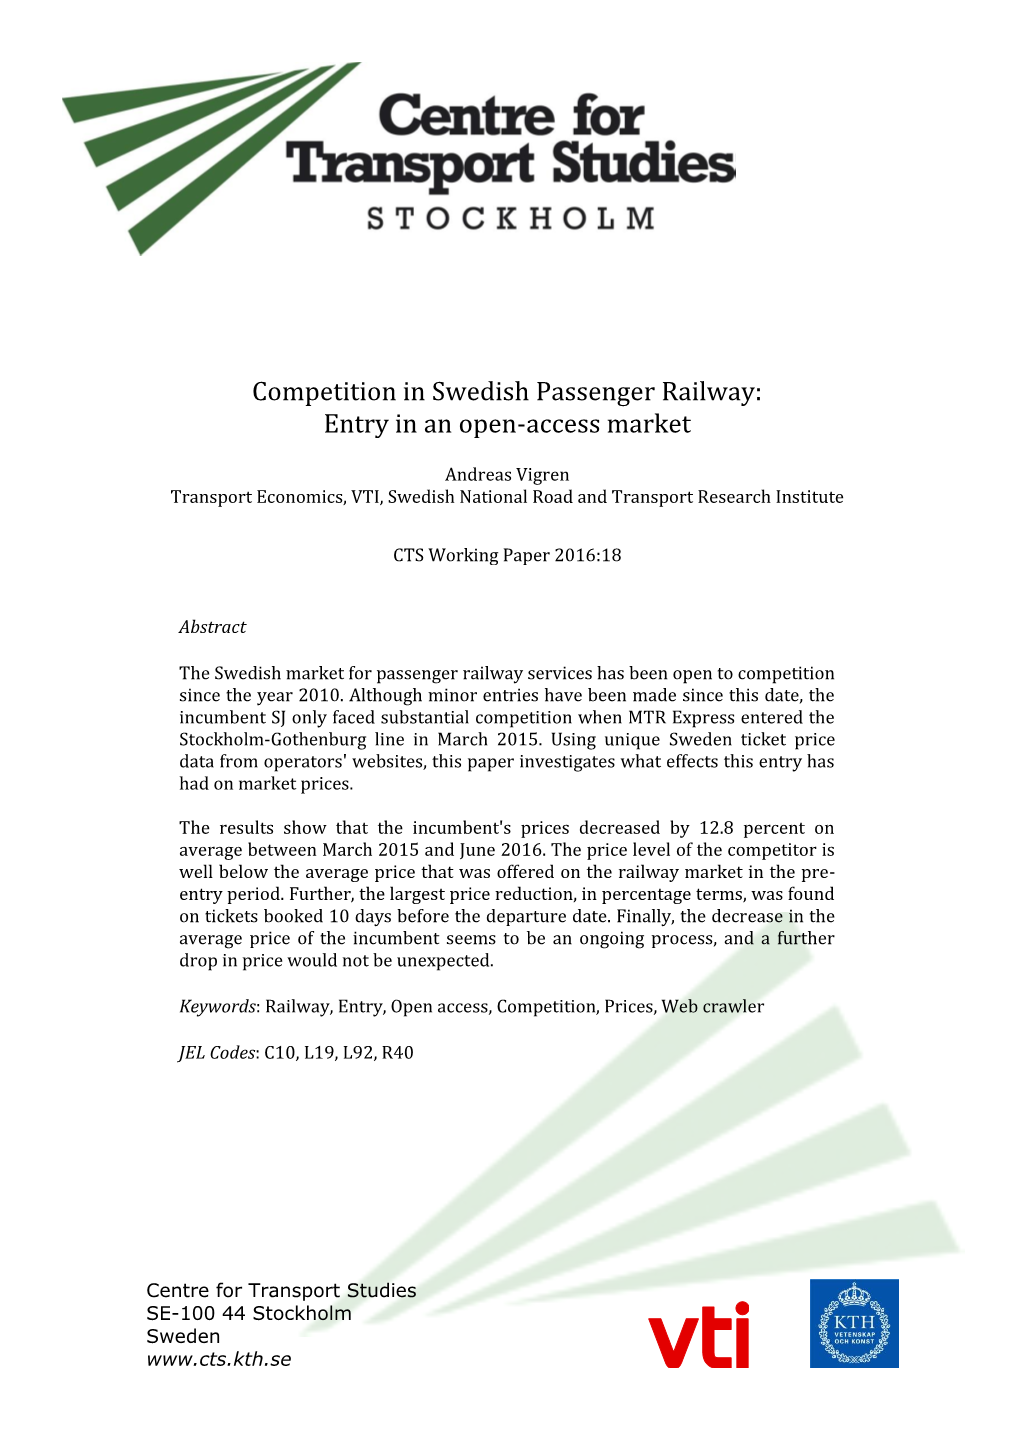 Competition in Swedish Passenger Railway: Entry in an Open-Access Market